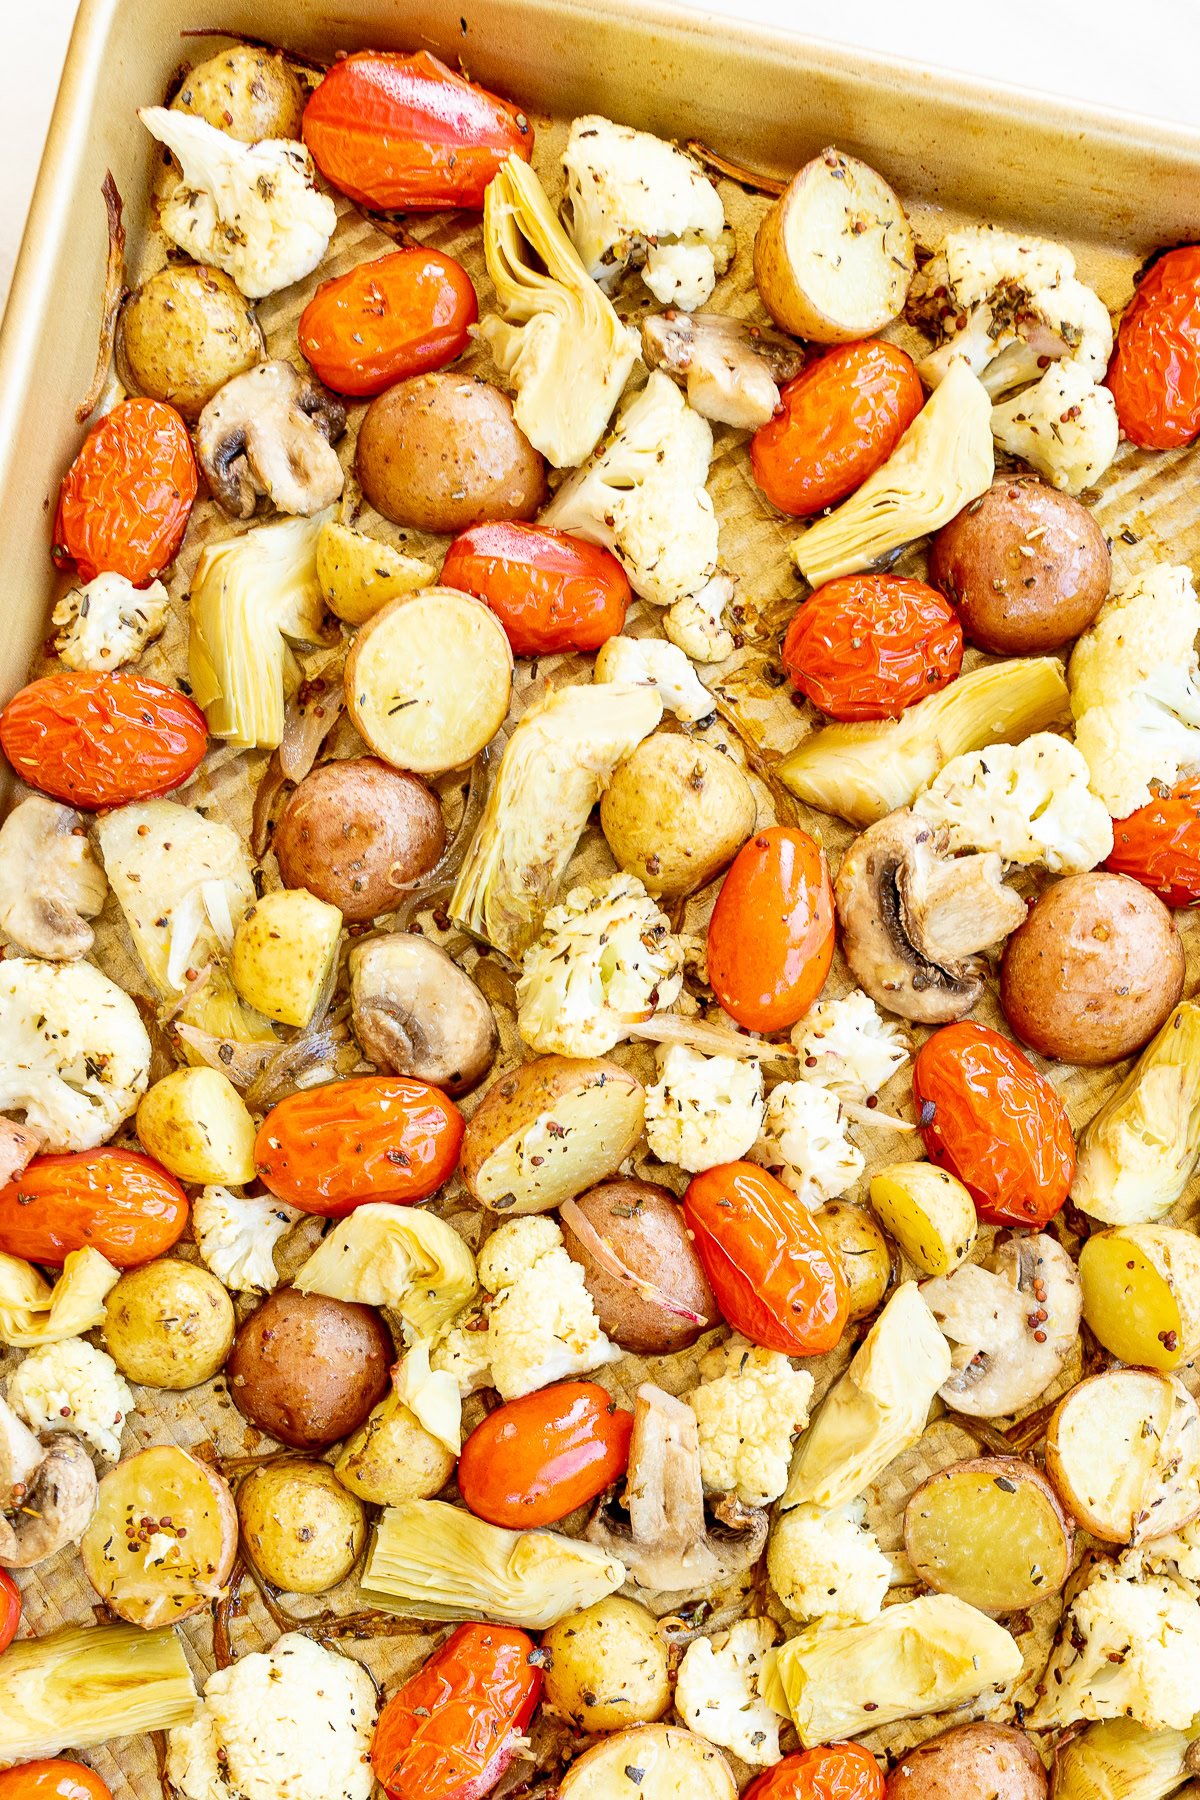 Roasted Italian vegetables and sausages on a baking sheet, including cauliflower, tomatoes, mushrooms, and artichokes.